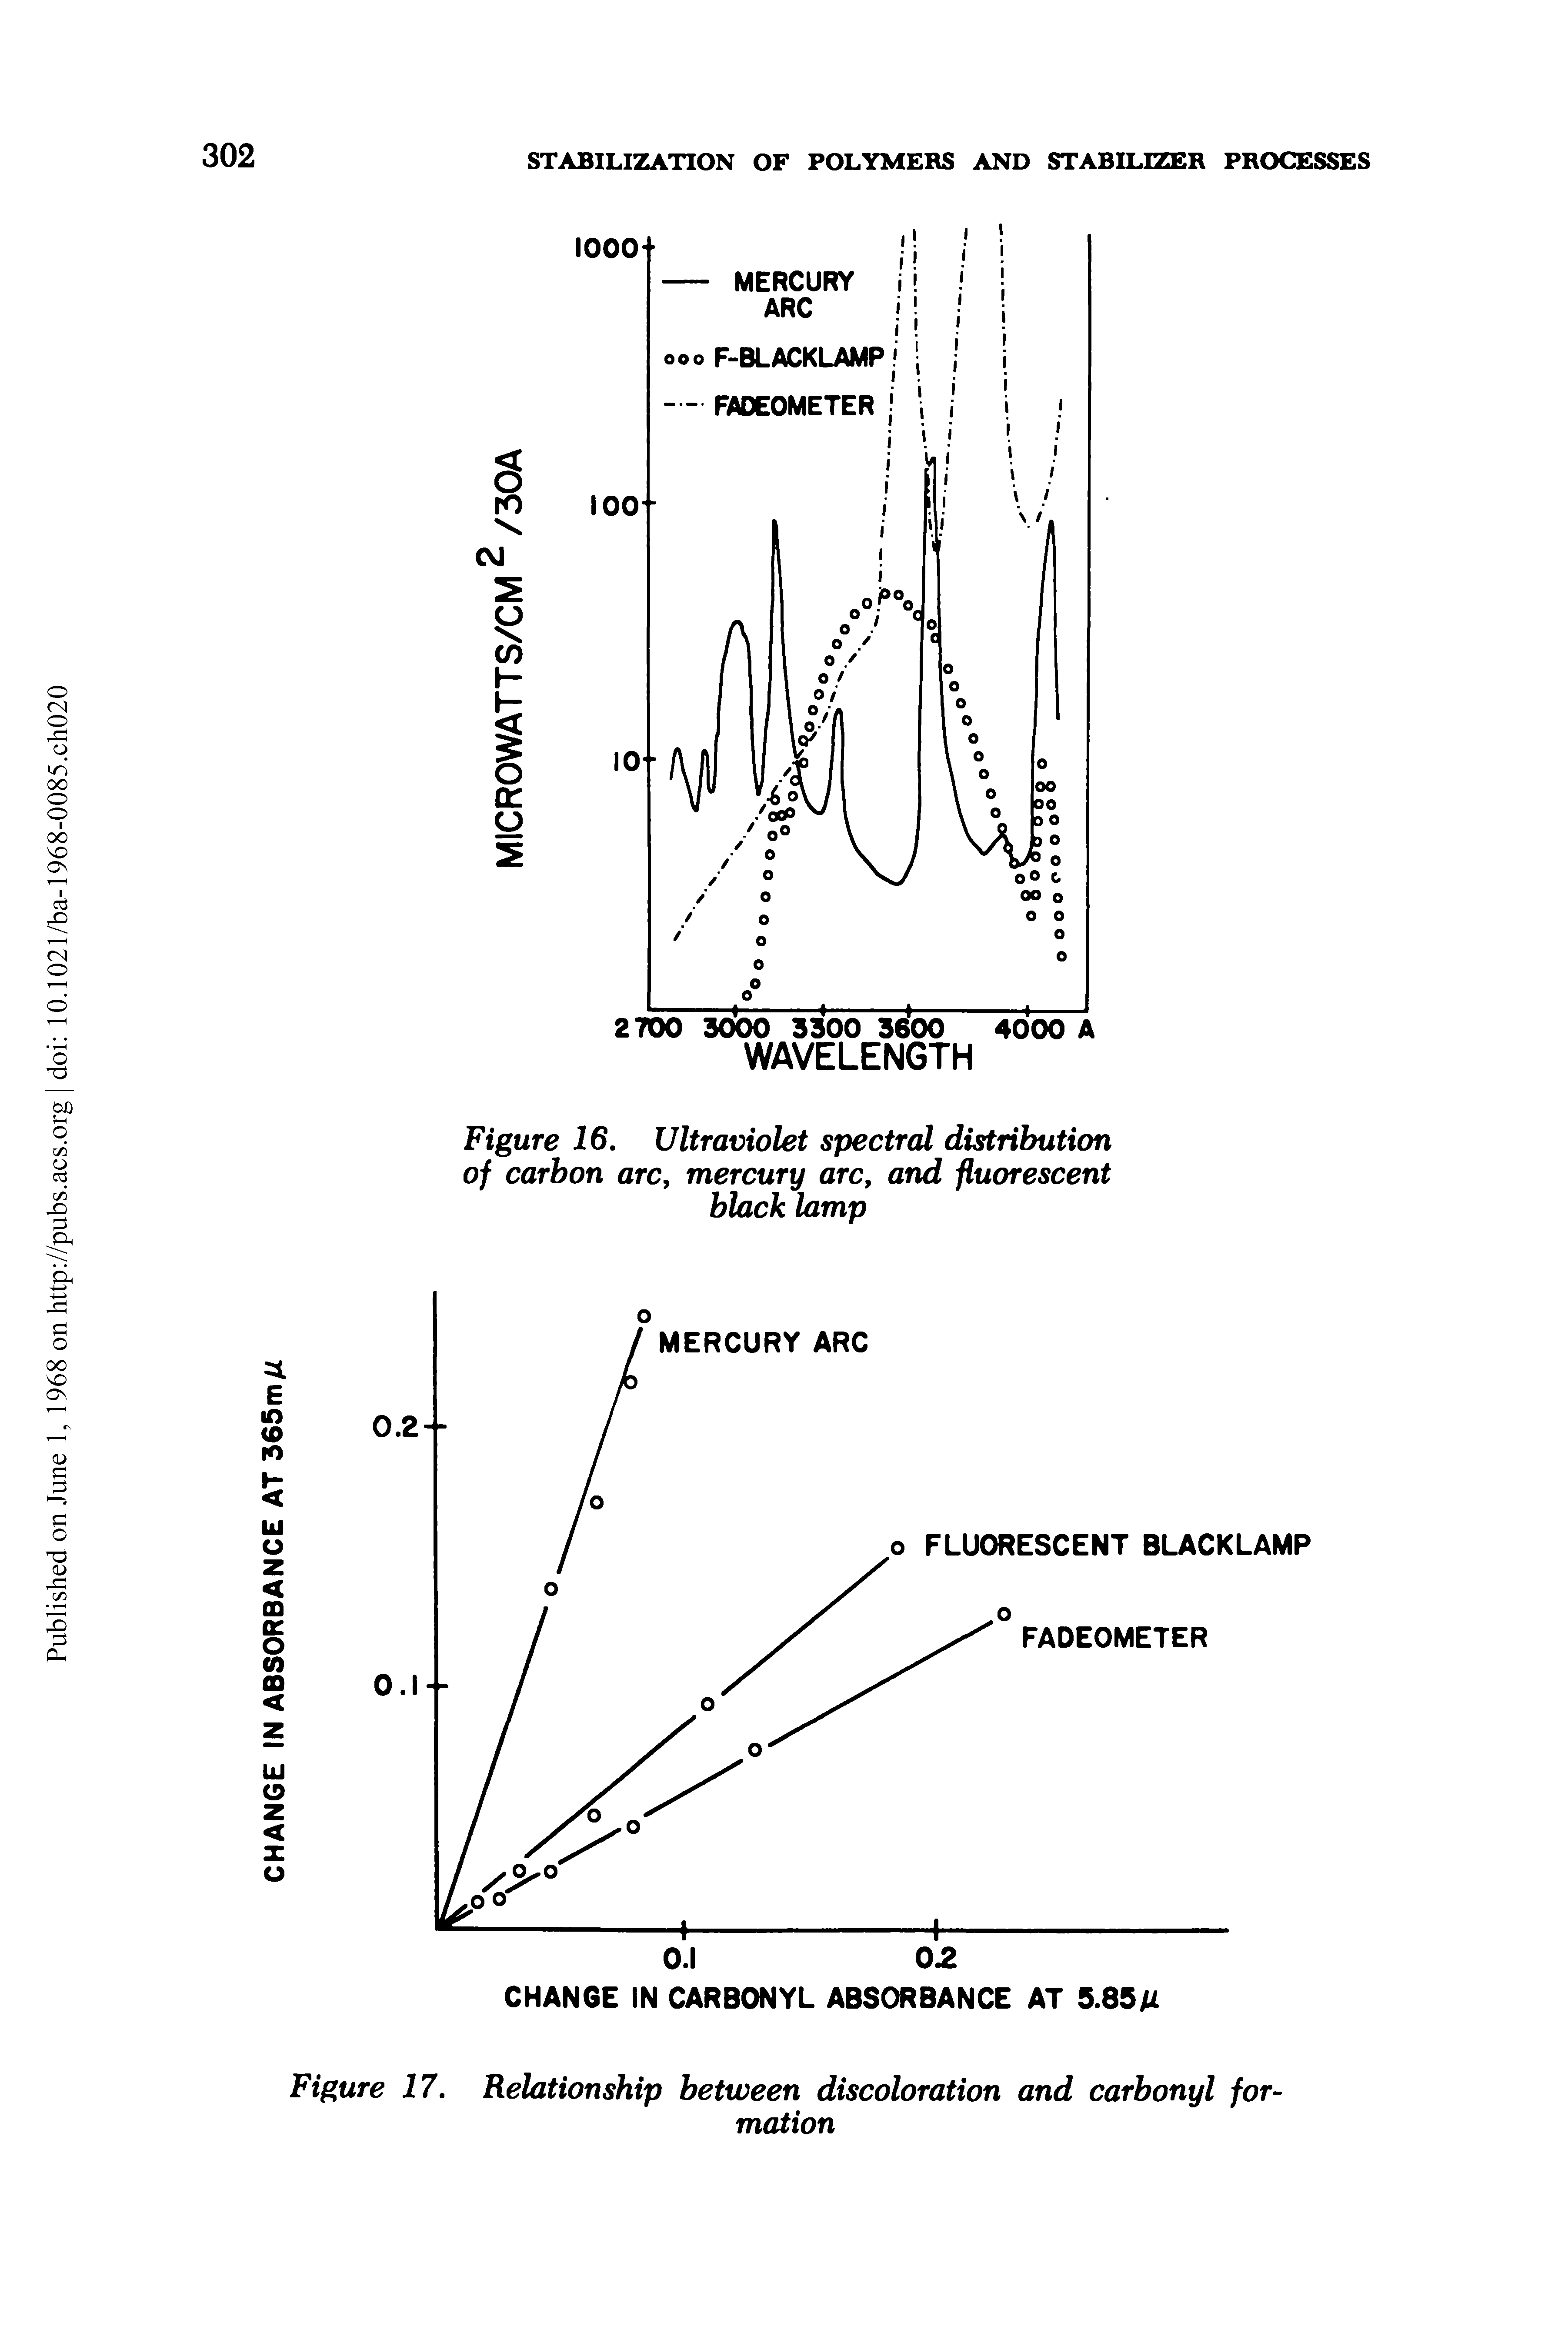 Figure 17. Relationship between discoloration and carbonyl formation...